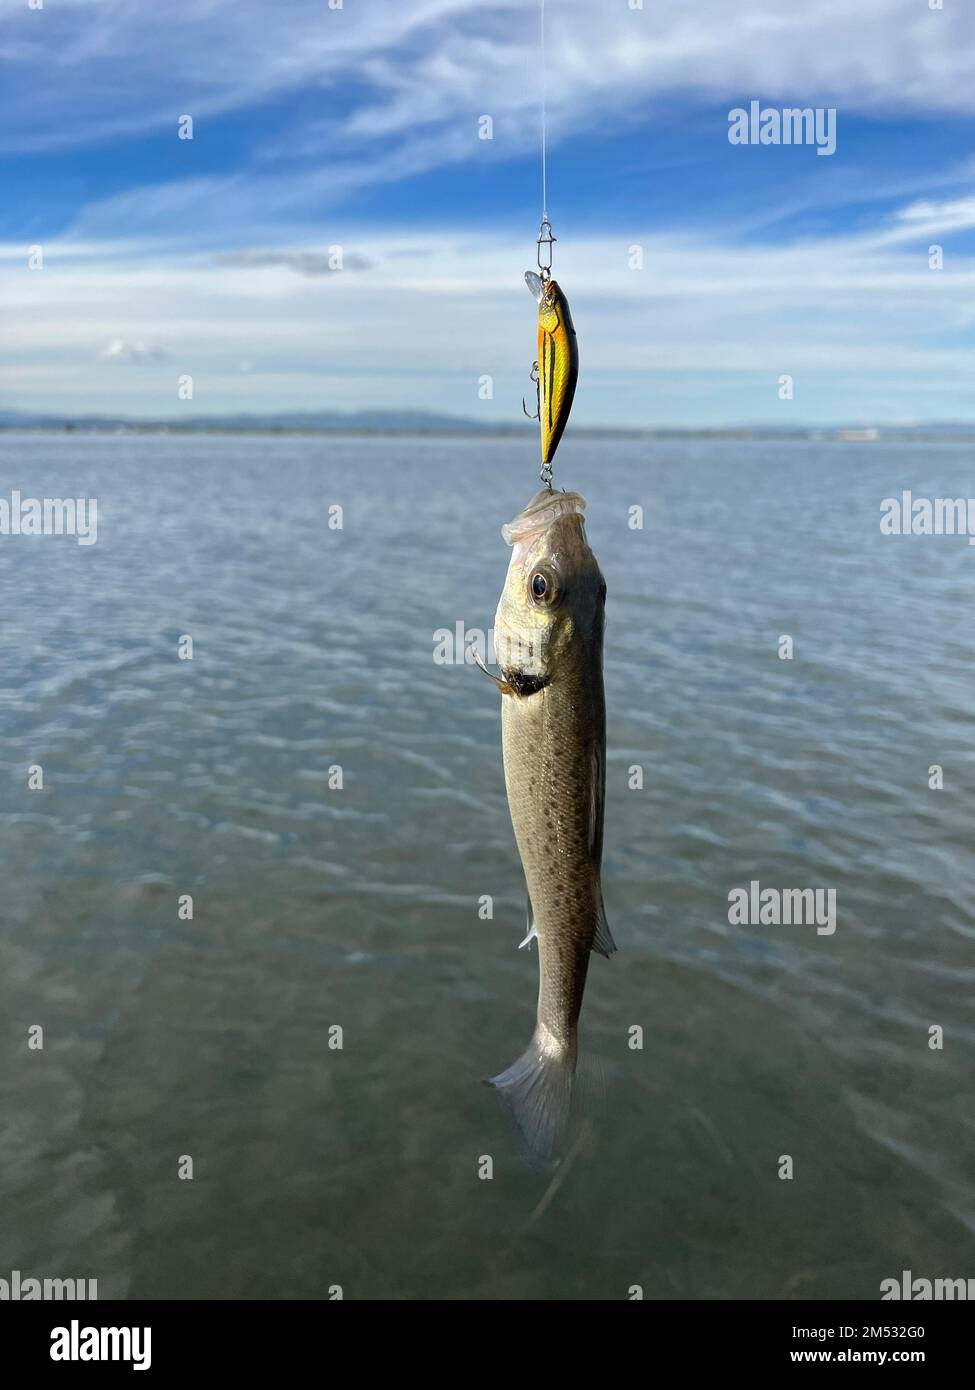 A big fish catching small one hanging from a fish hook Stock Photo